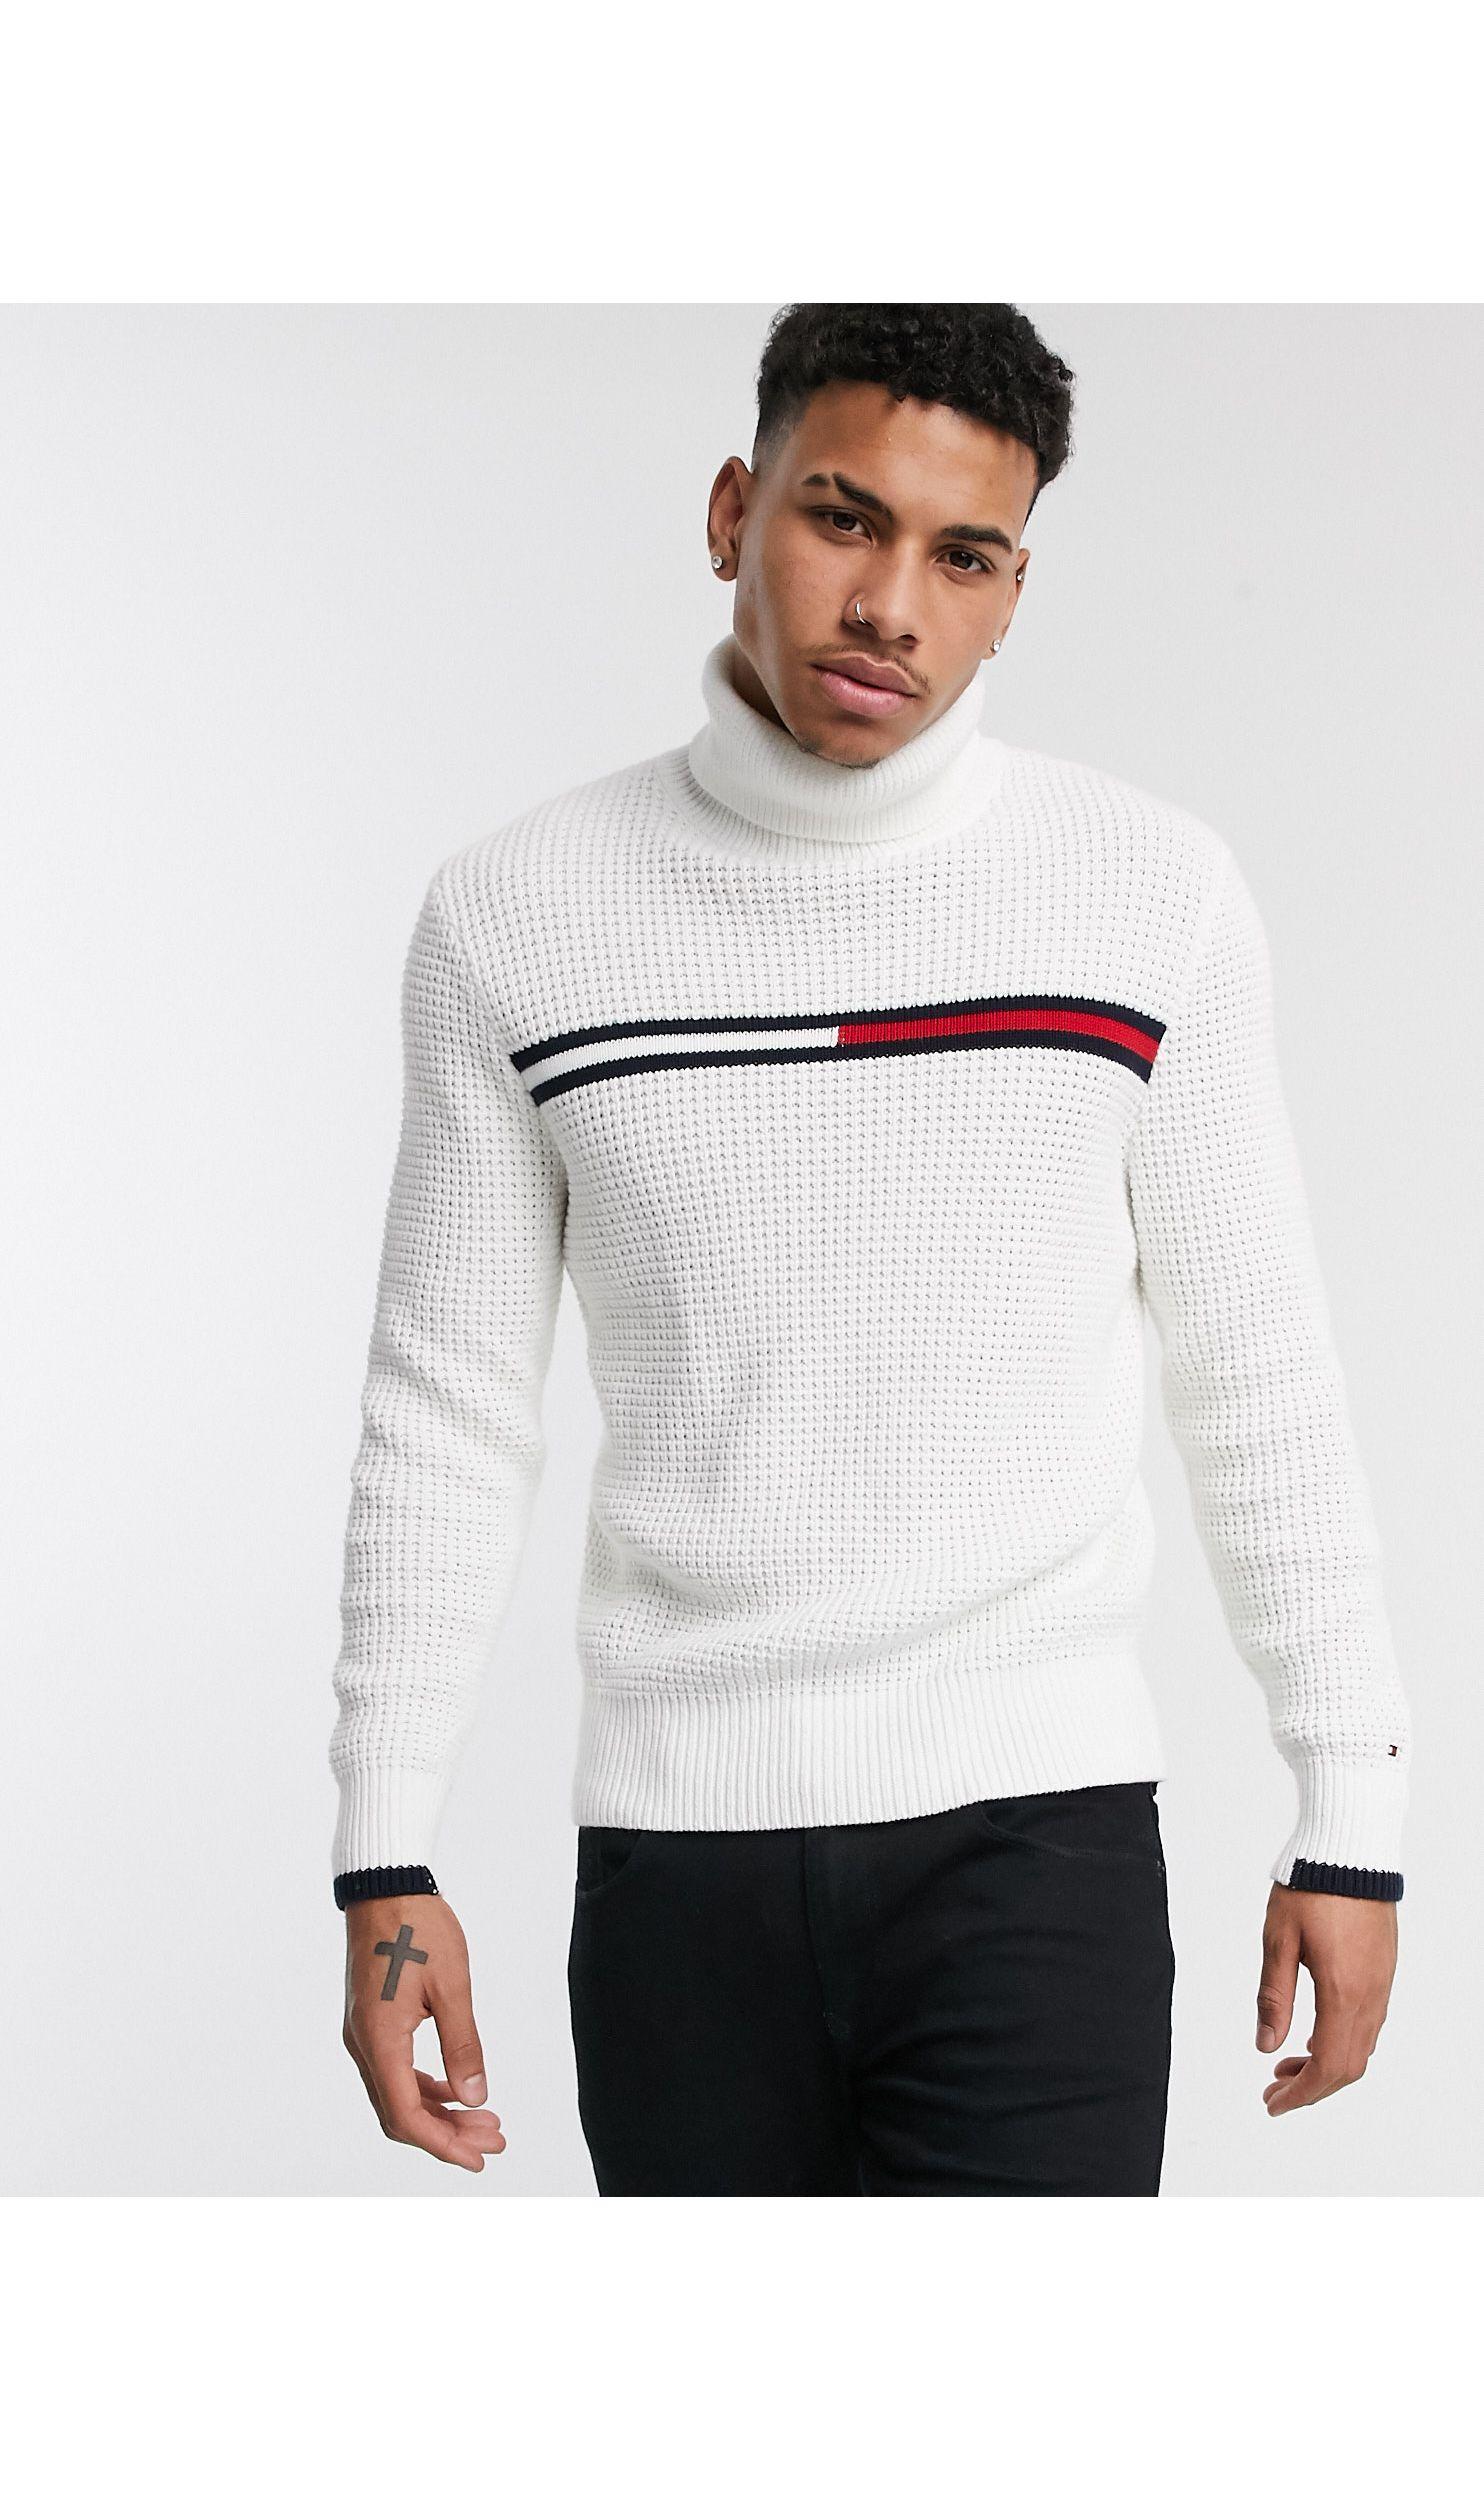 Tommy Hilfiger Cotton Trent Turtleneck Knitted Sweater in White for Men -  Lyst